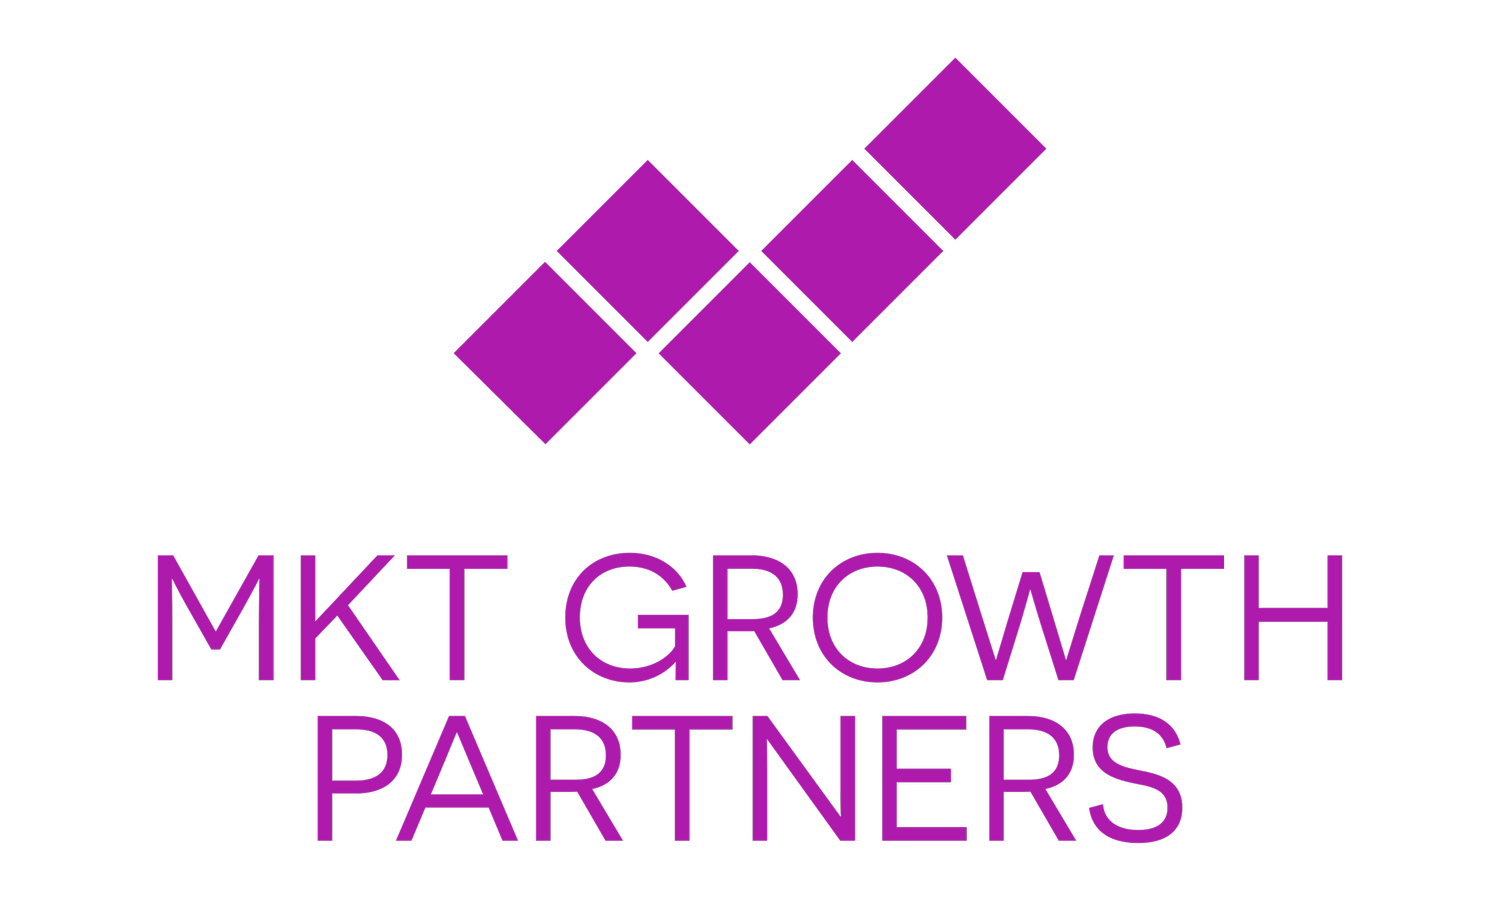 MKT GROWTH PARTNERS